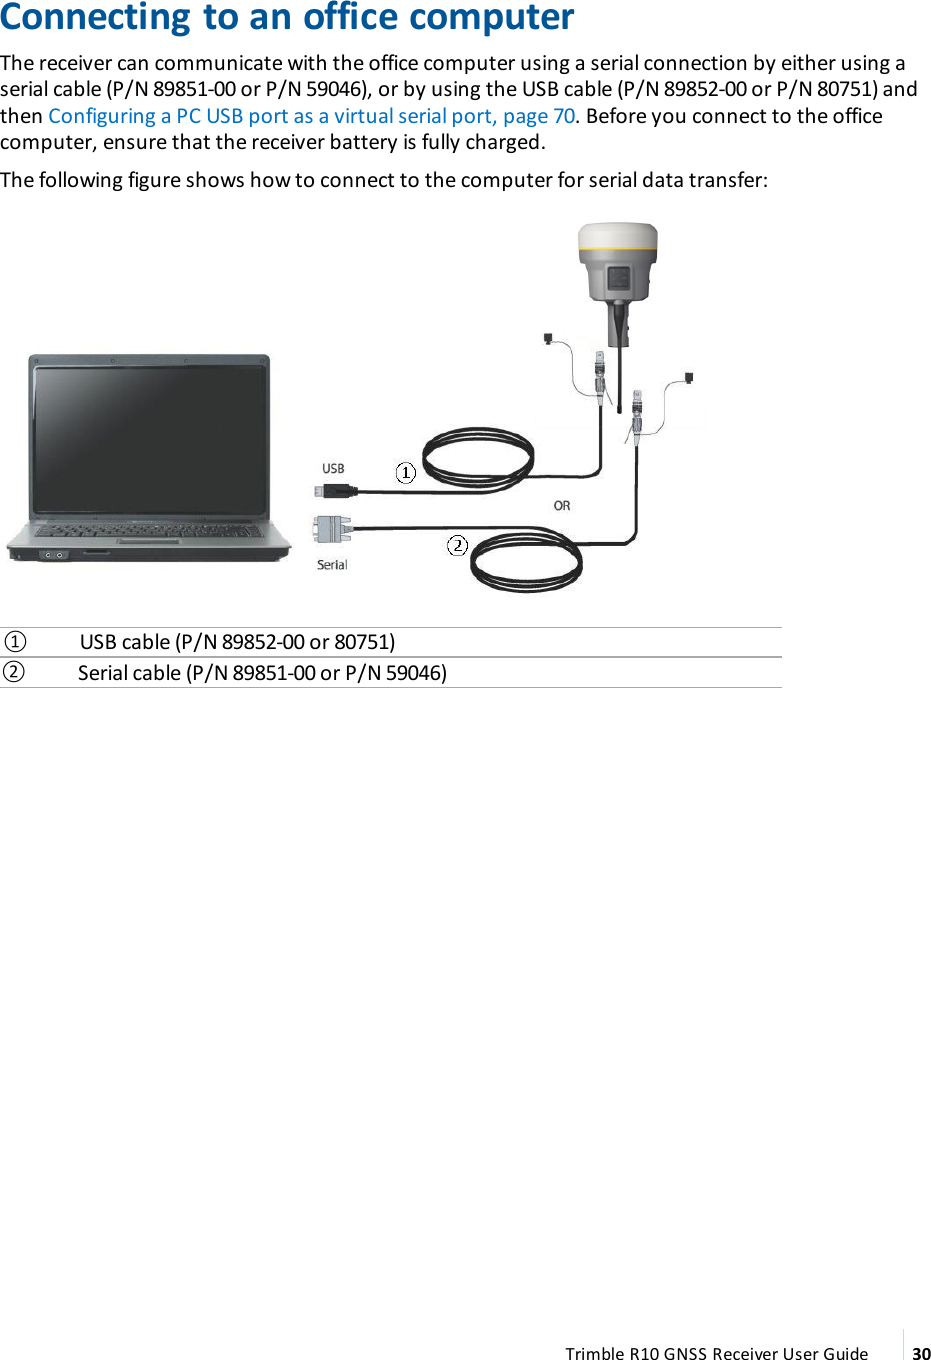 Connecting to an office computerThe receiver can communicate with the office computer using a serial connection by either using a serial cable (P/N 89851-00 or P/N 59046), or by using the USB cable  (P/N 89852-00 or P/N 80751) and then Configuring a PC USB port as a virtual serial port, page 70.  Before you connect to the office computer, ensure that the receiver battery is fully charged.The following figure shows how to connect to the computer for serial data transfer:①USB cable (P/N 89852-00 or 80751)②Serial cable (P/N 89851-00 or P/N 59046)Trimble R10 GNSS Receiver User Guide 30